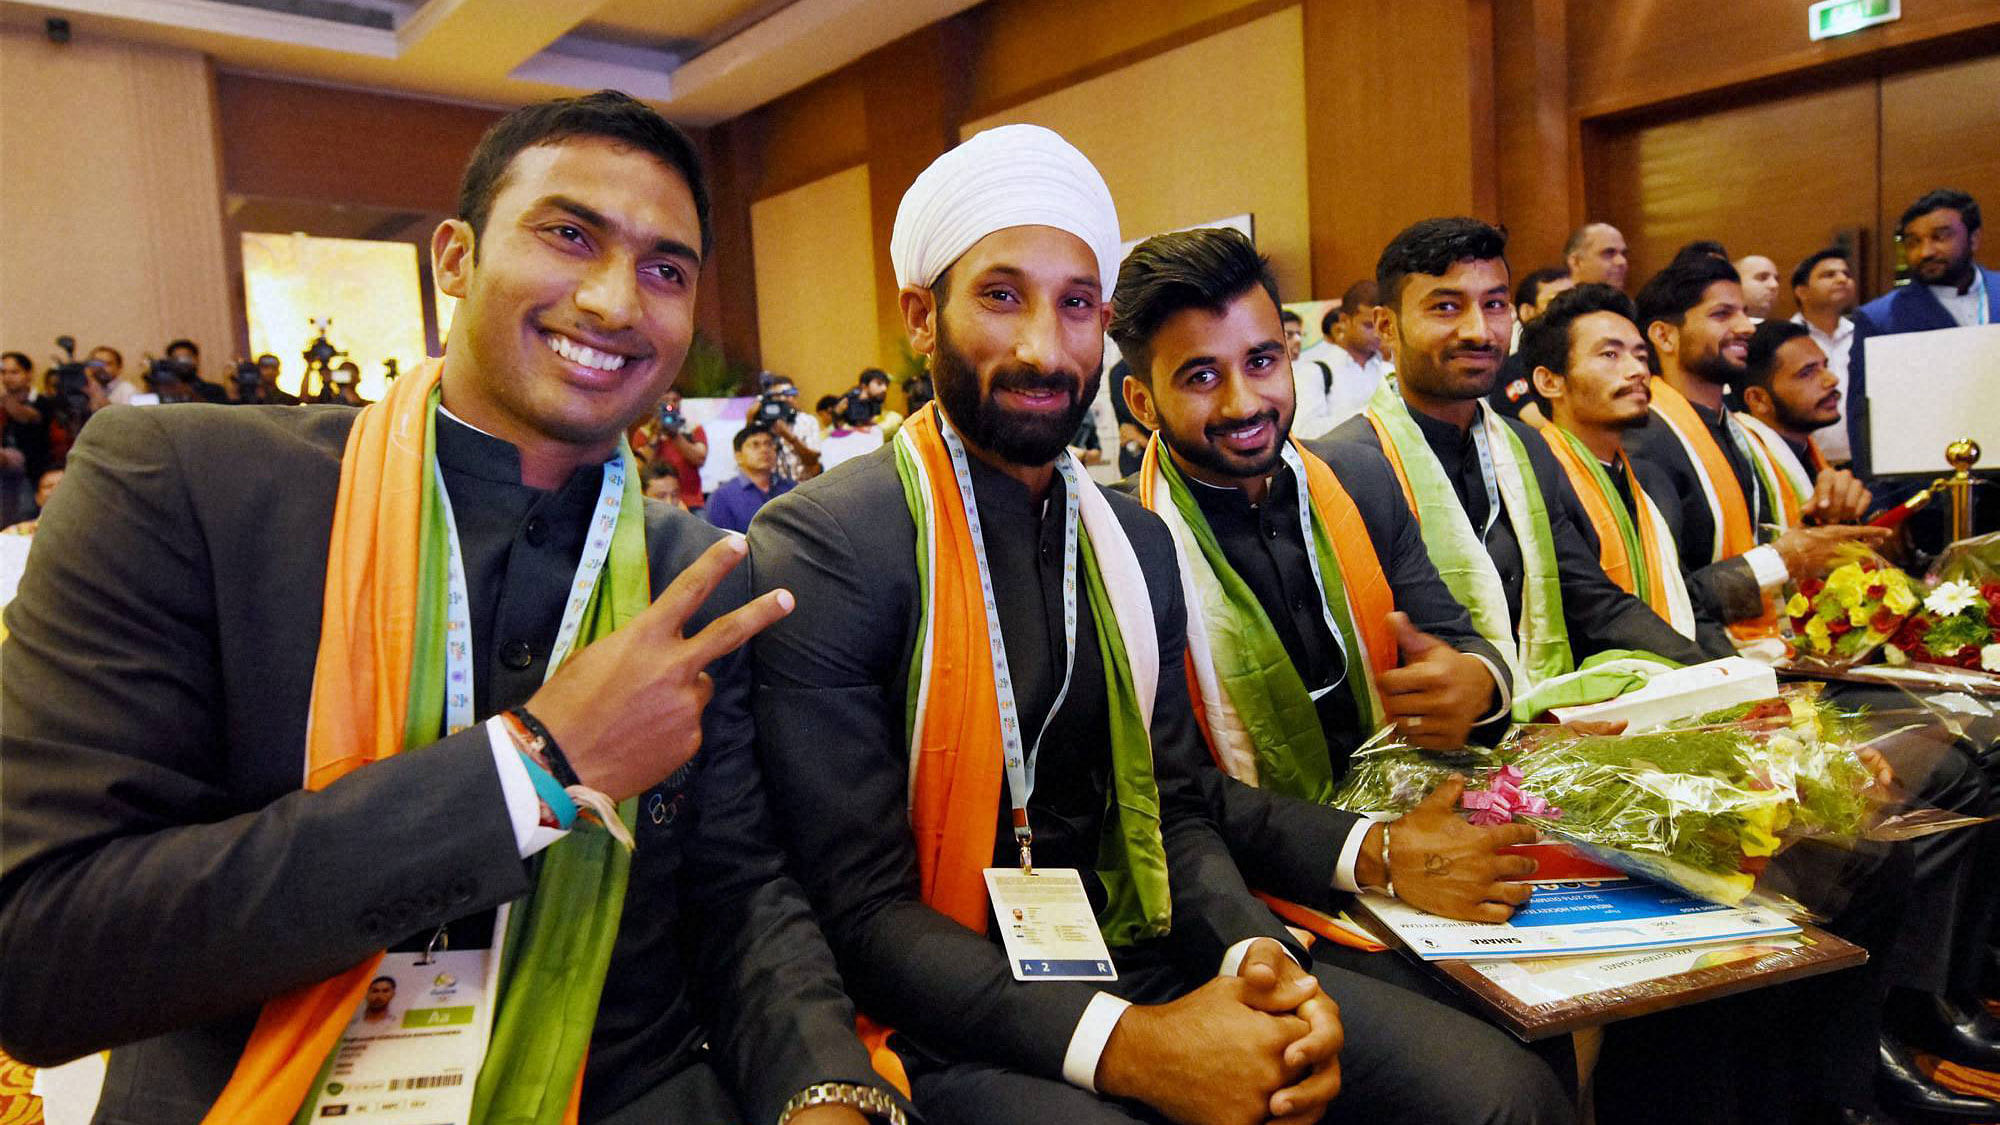 VR Raghunath with Sardara Singh and other team members after the announcement of the squad for Rio Olympics 2016. (Photo: PTI)